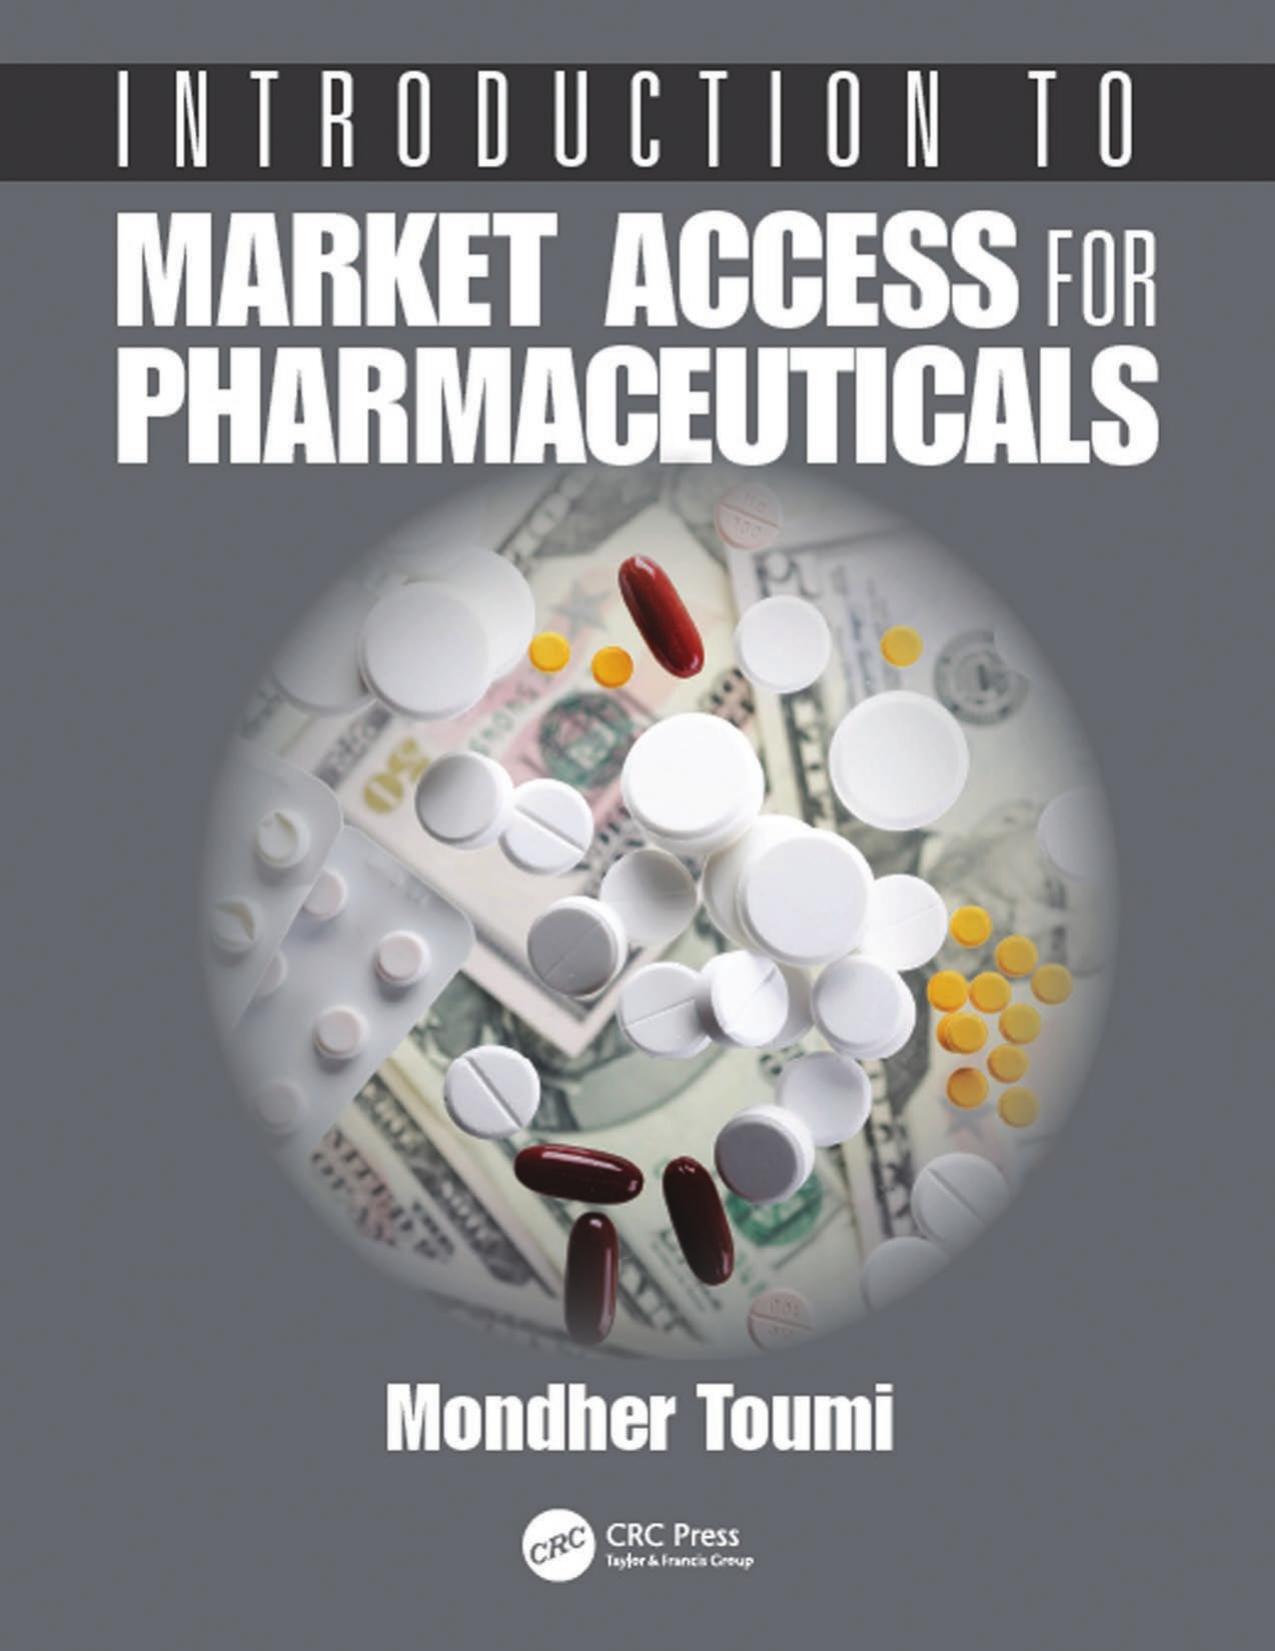 Introduction to Market Access for Pharmaceuticals - Mondher Toumi.jpg